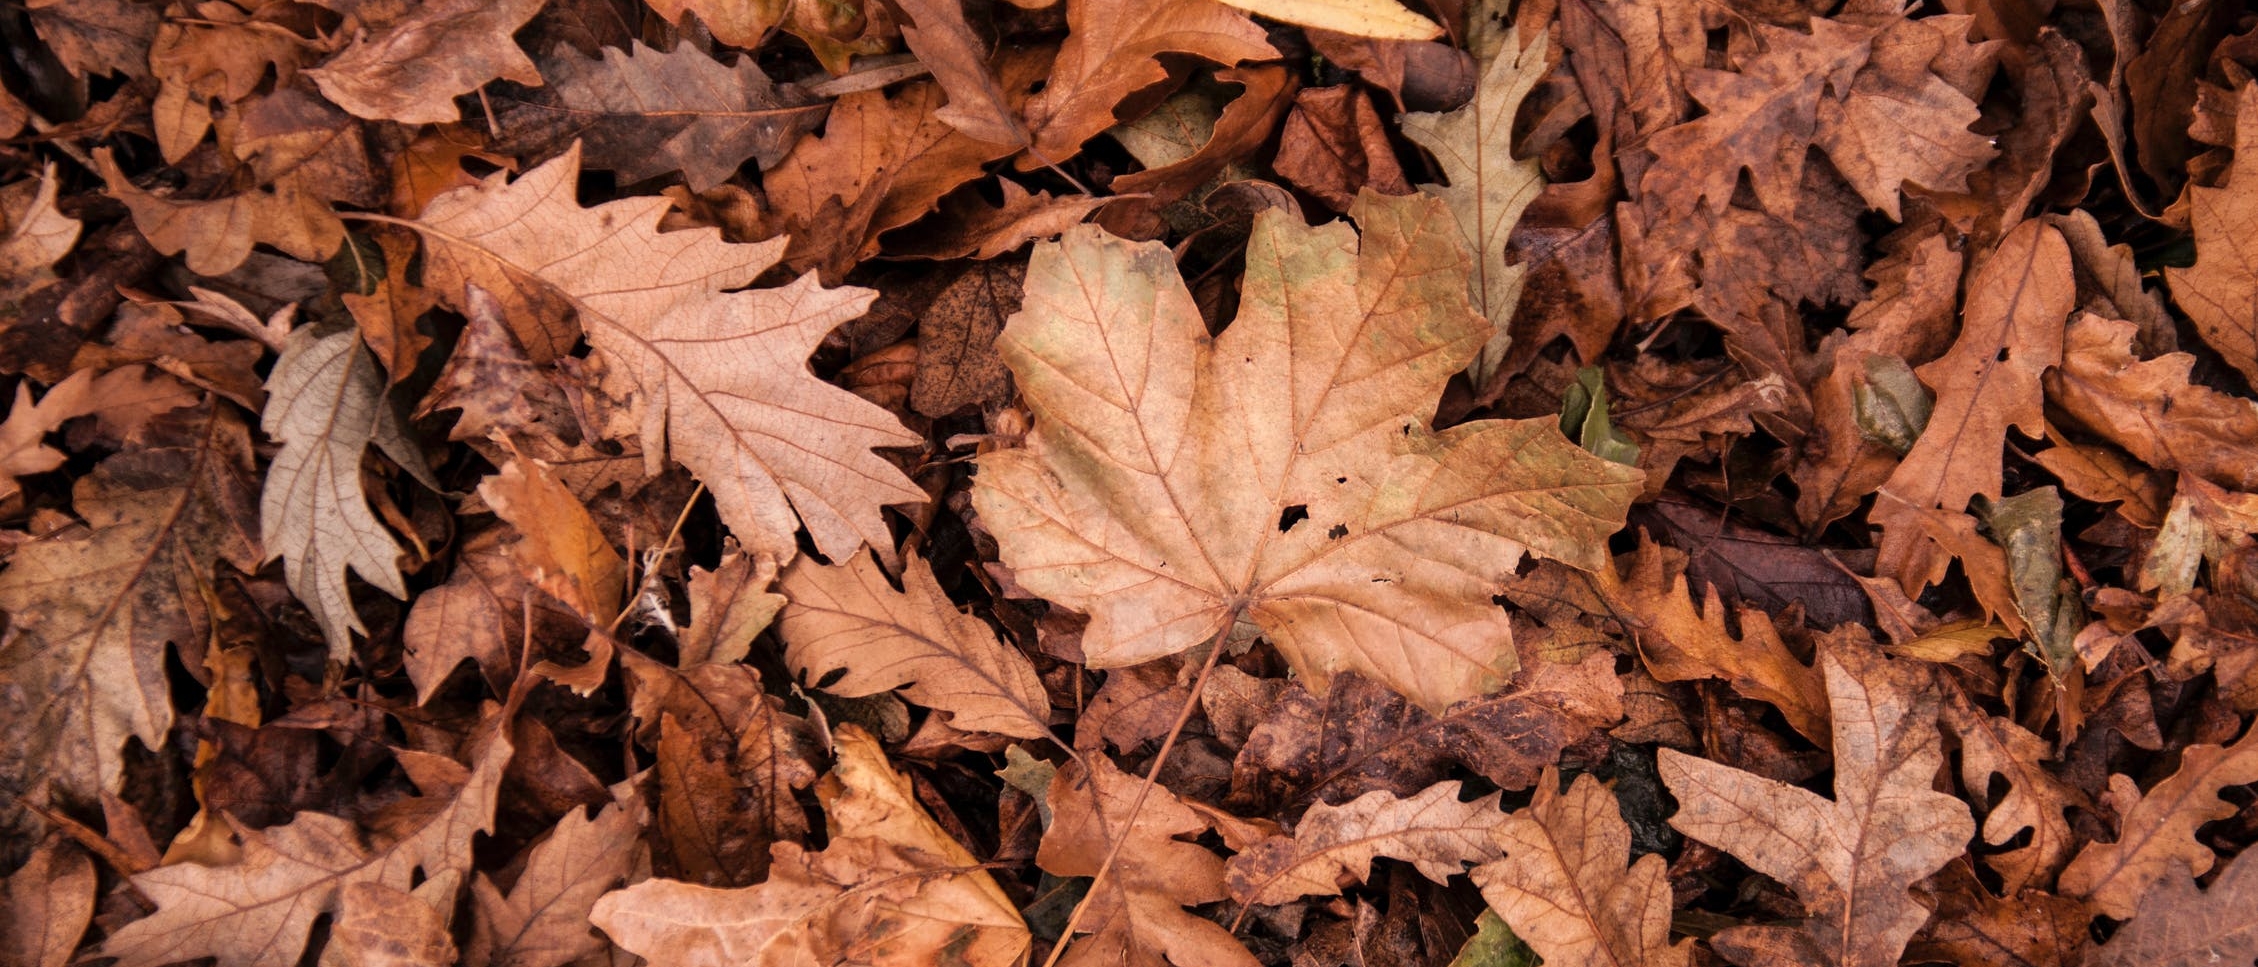 Brown, Fallen Leaves Scattered Across the Ground